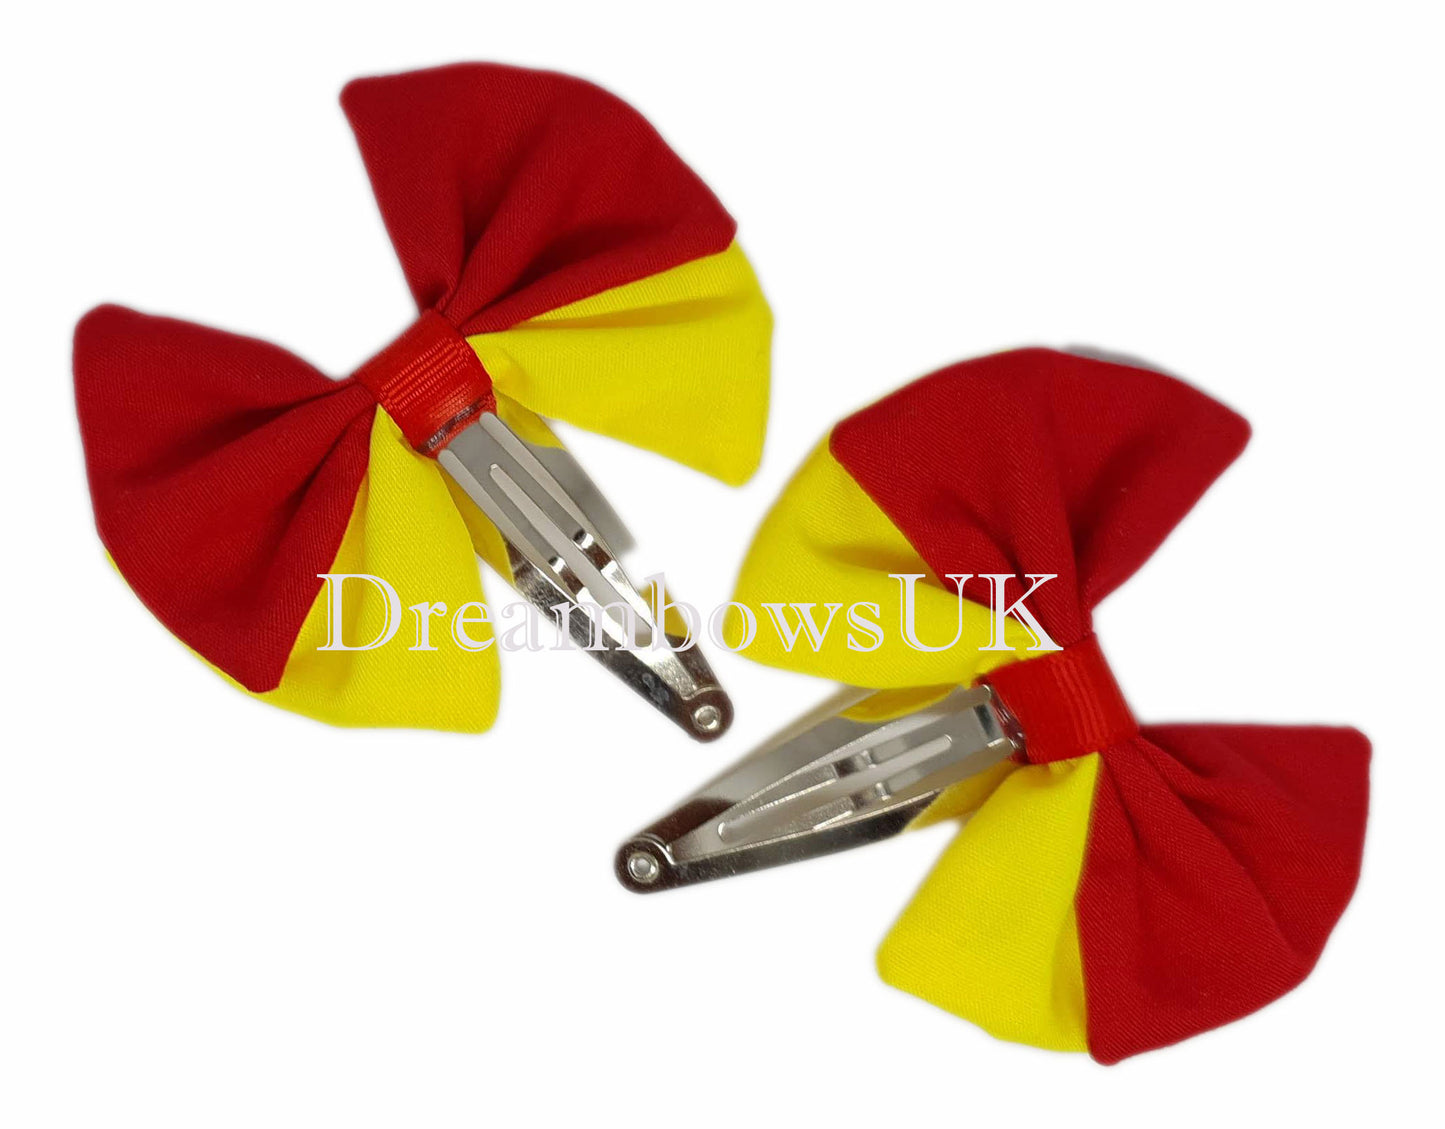 2x Red and yellow fabric hair bows